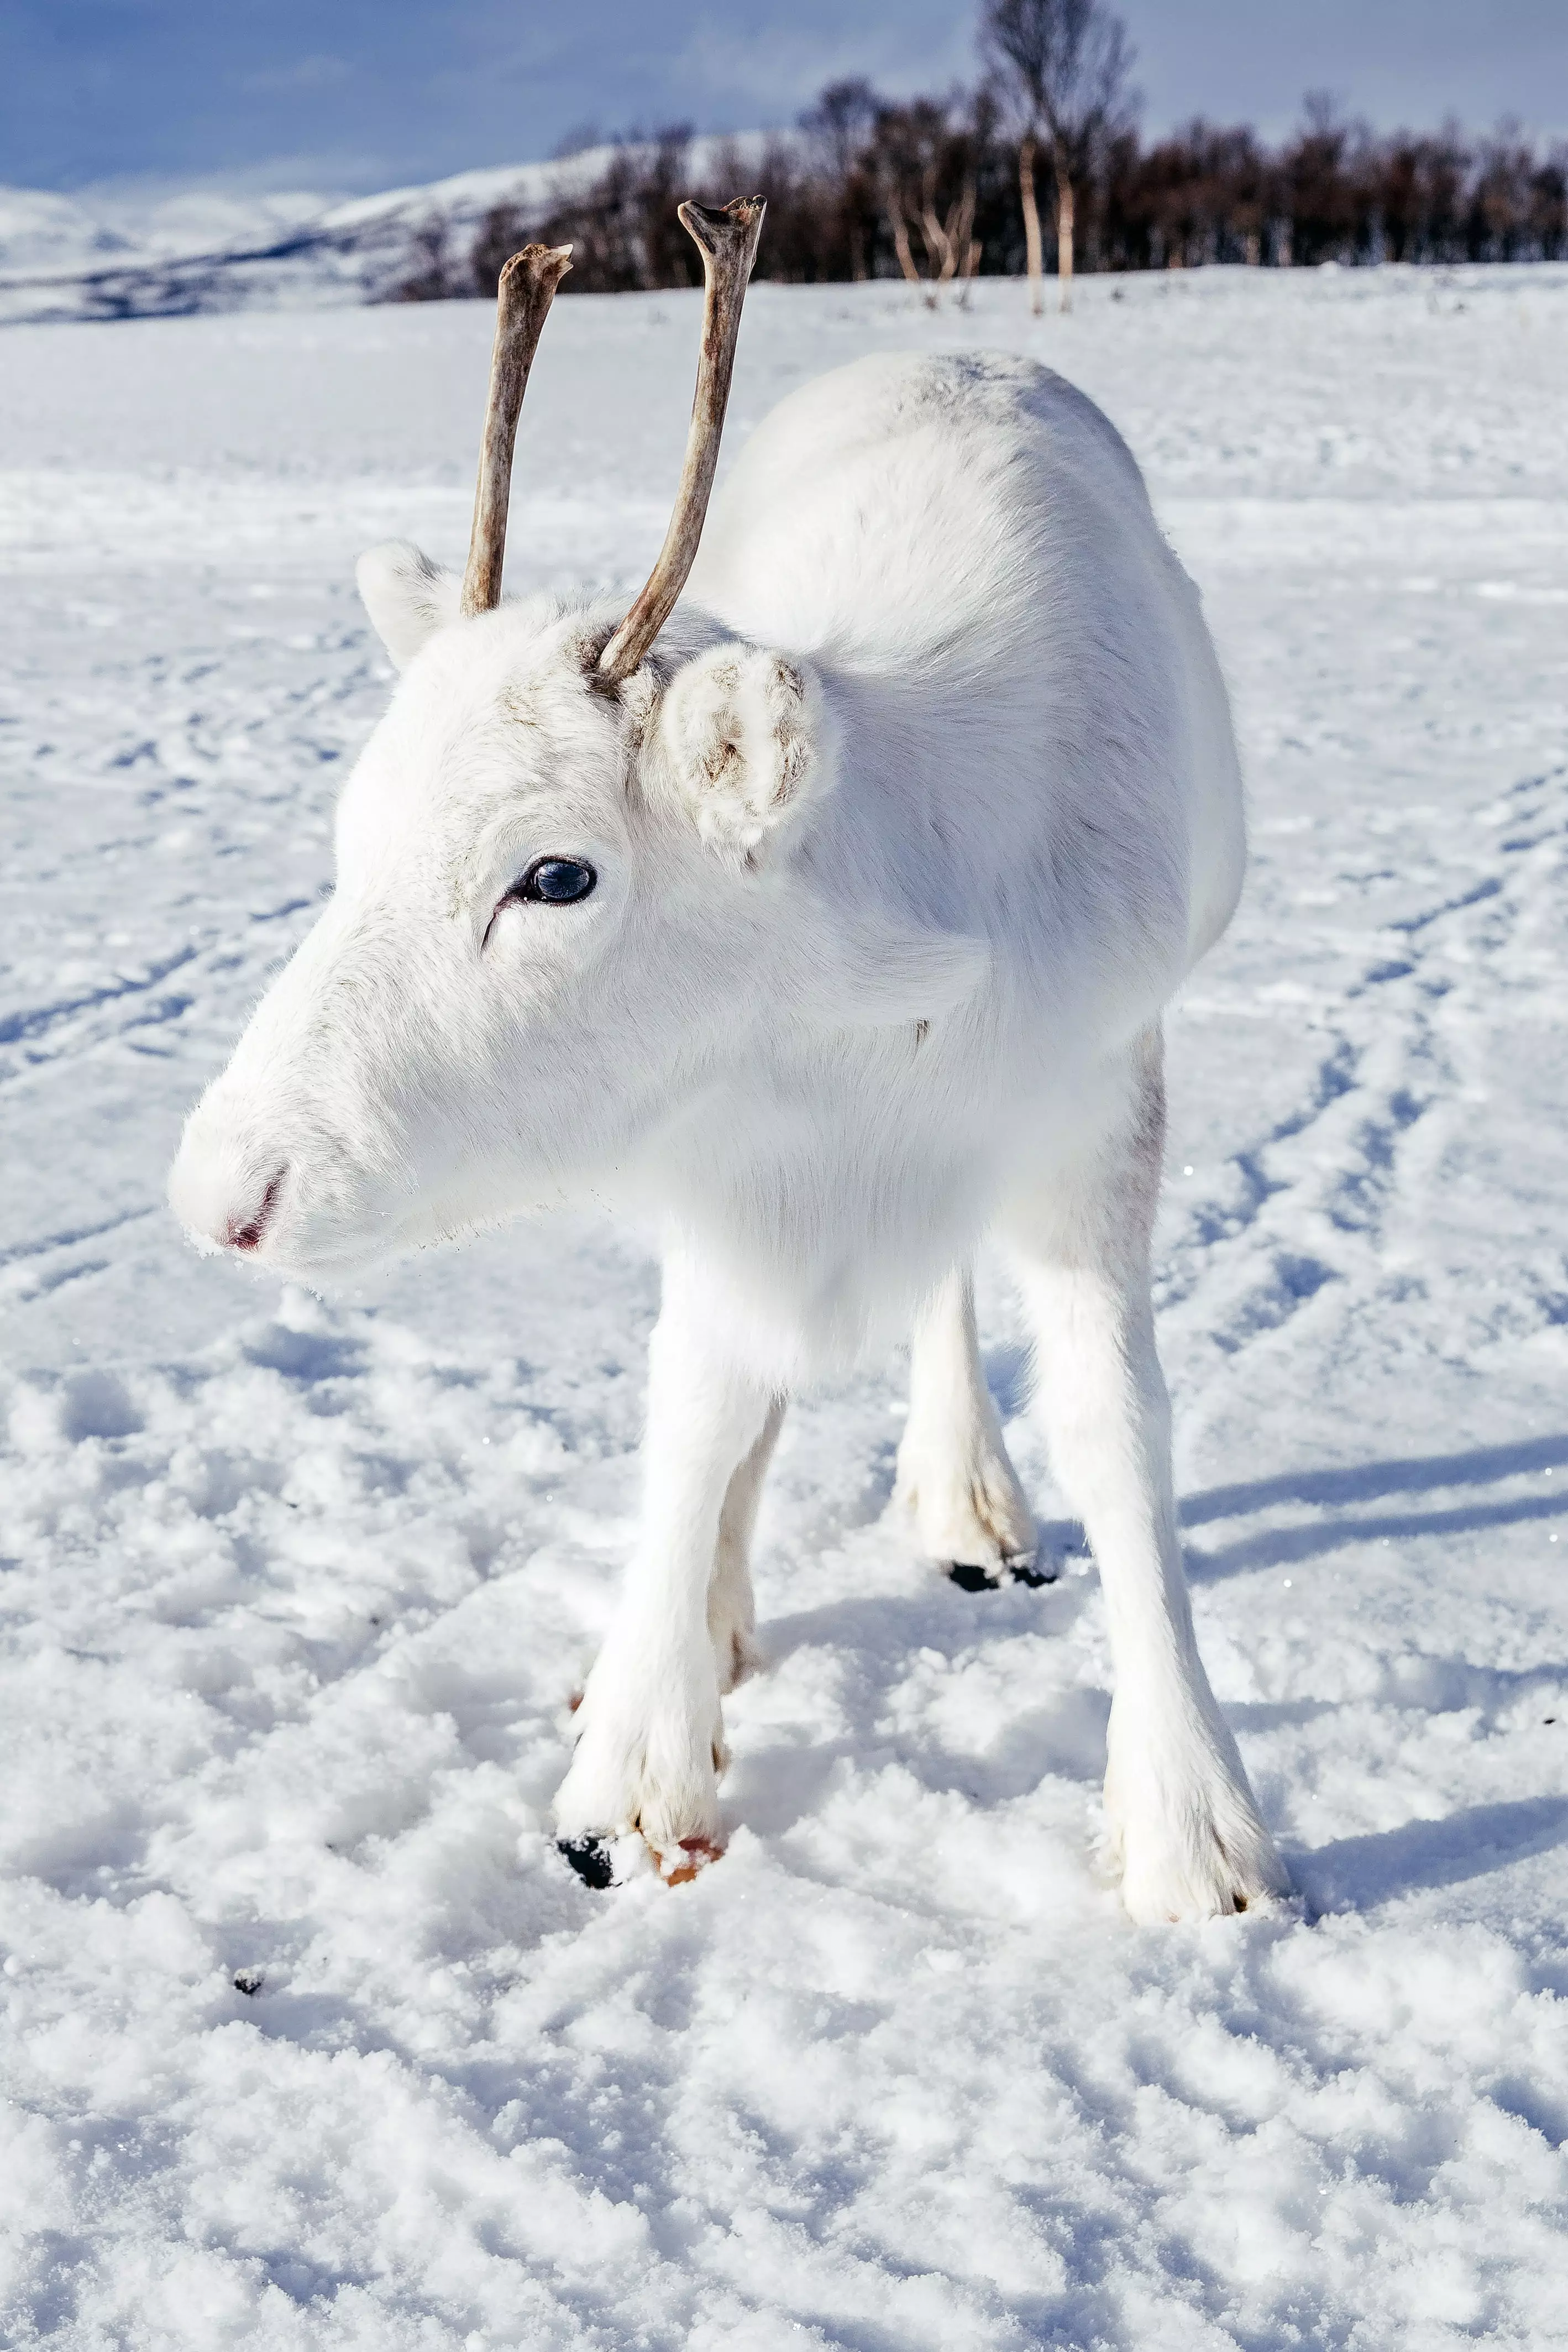 The extremely rare reindeer was spotted in Norway. (